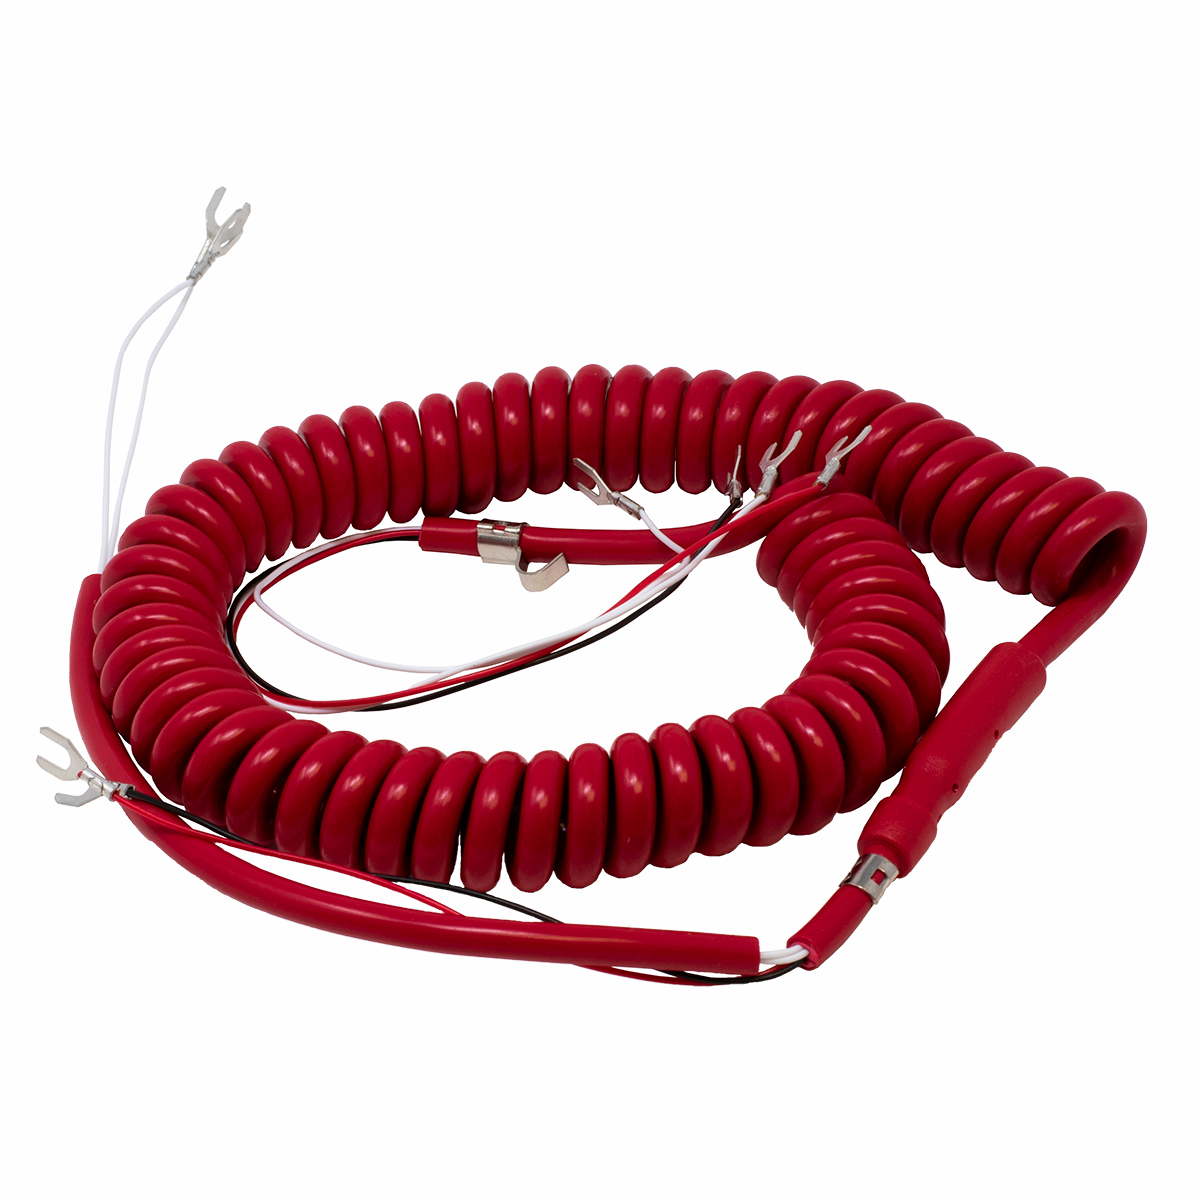 6' Red 4 Conductor Spade to Spade Handset Cord